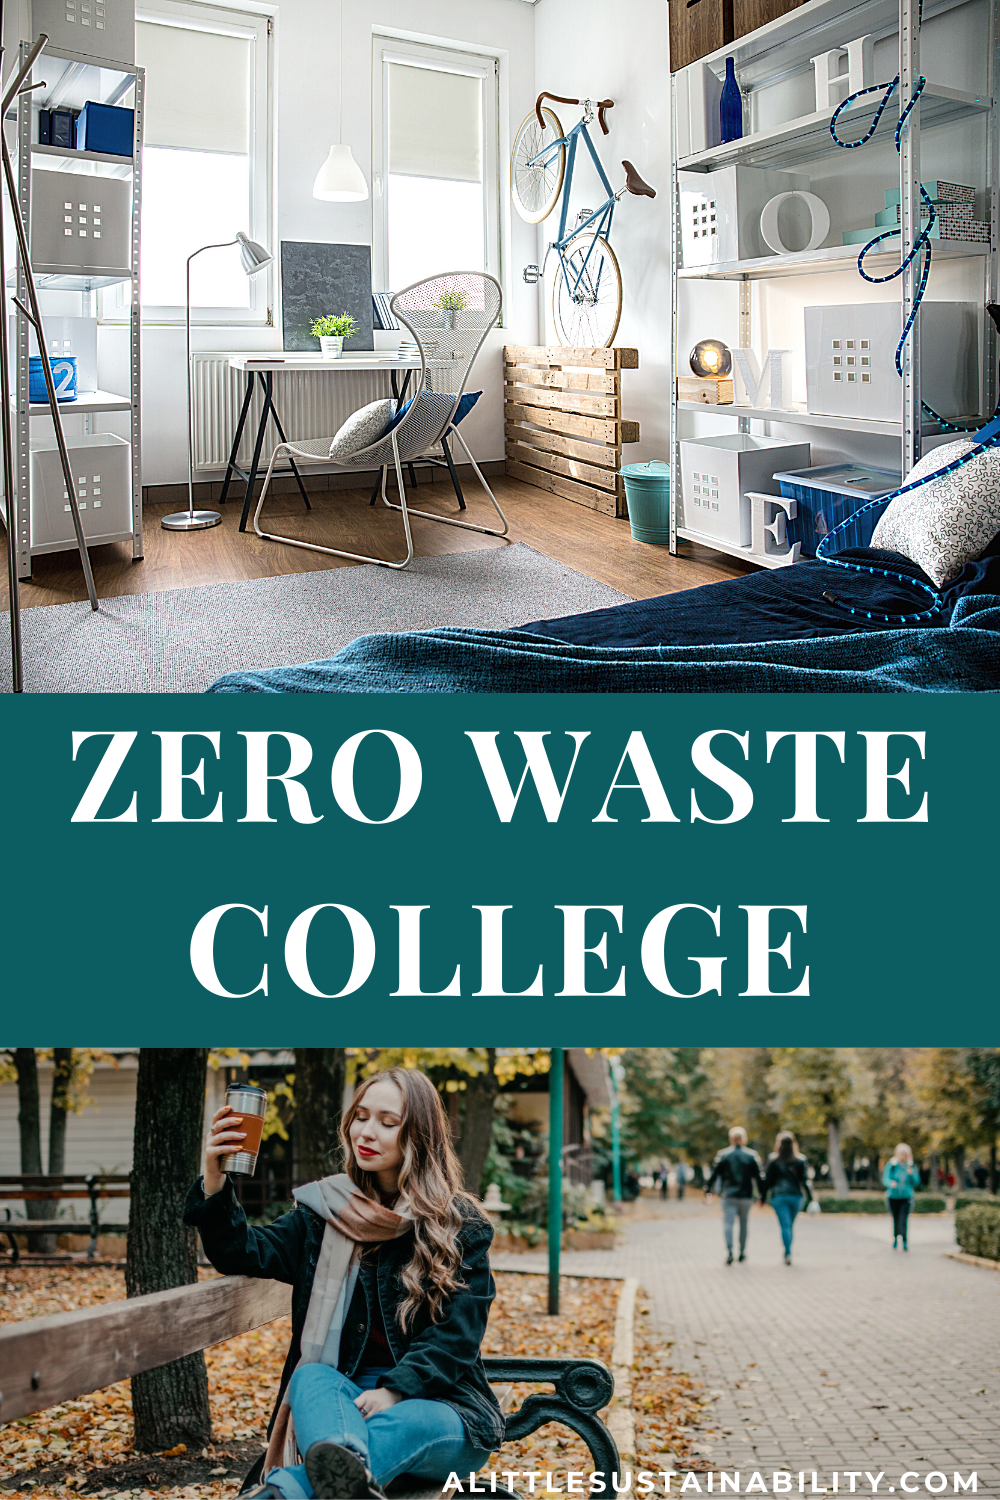 College and University Life can be Eco-Conscious. Read on for resources on how to live zero waste in college and on a budget. Learn more at alittlesustainability.com/how-to-live-zero-waste-in-college/